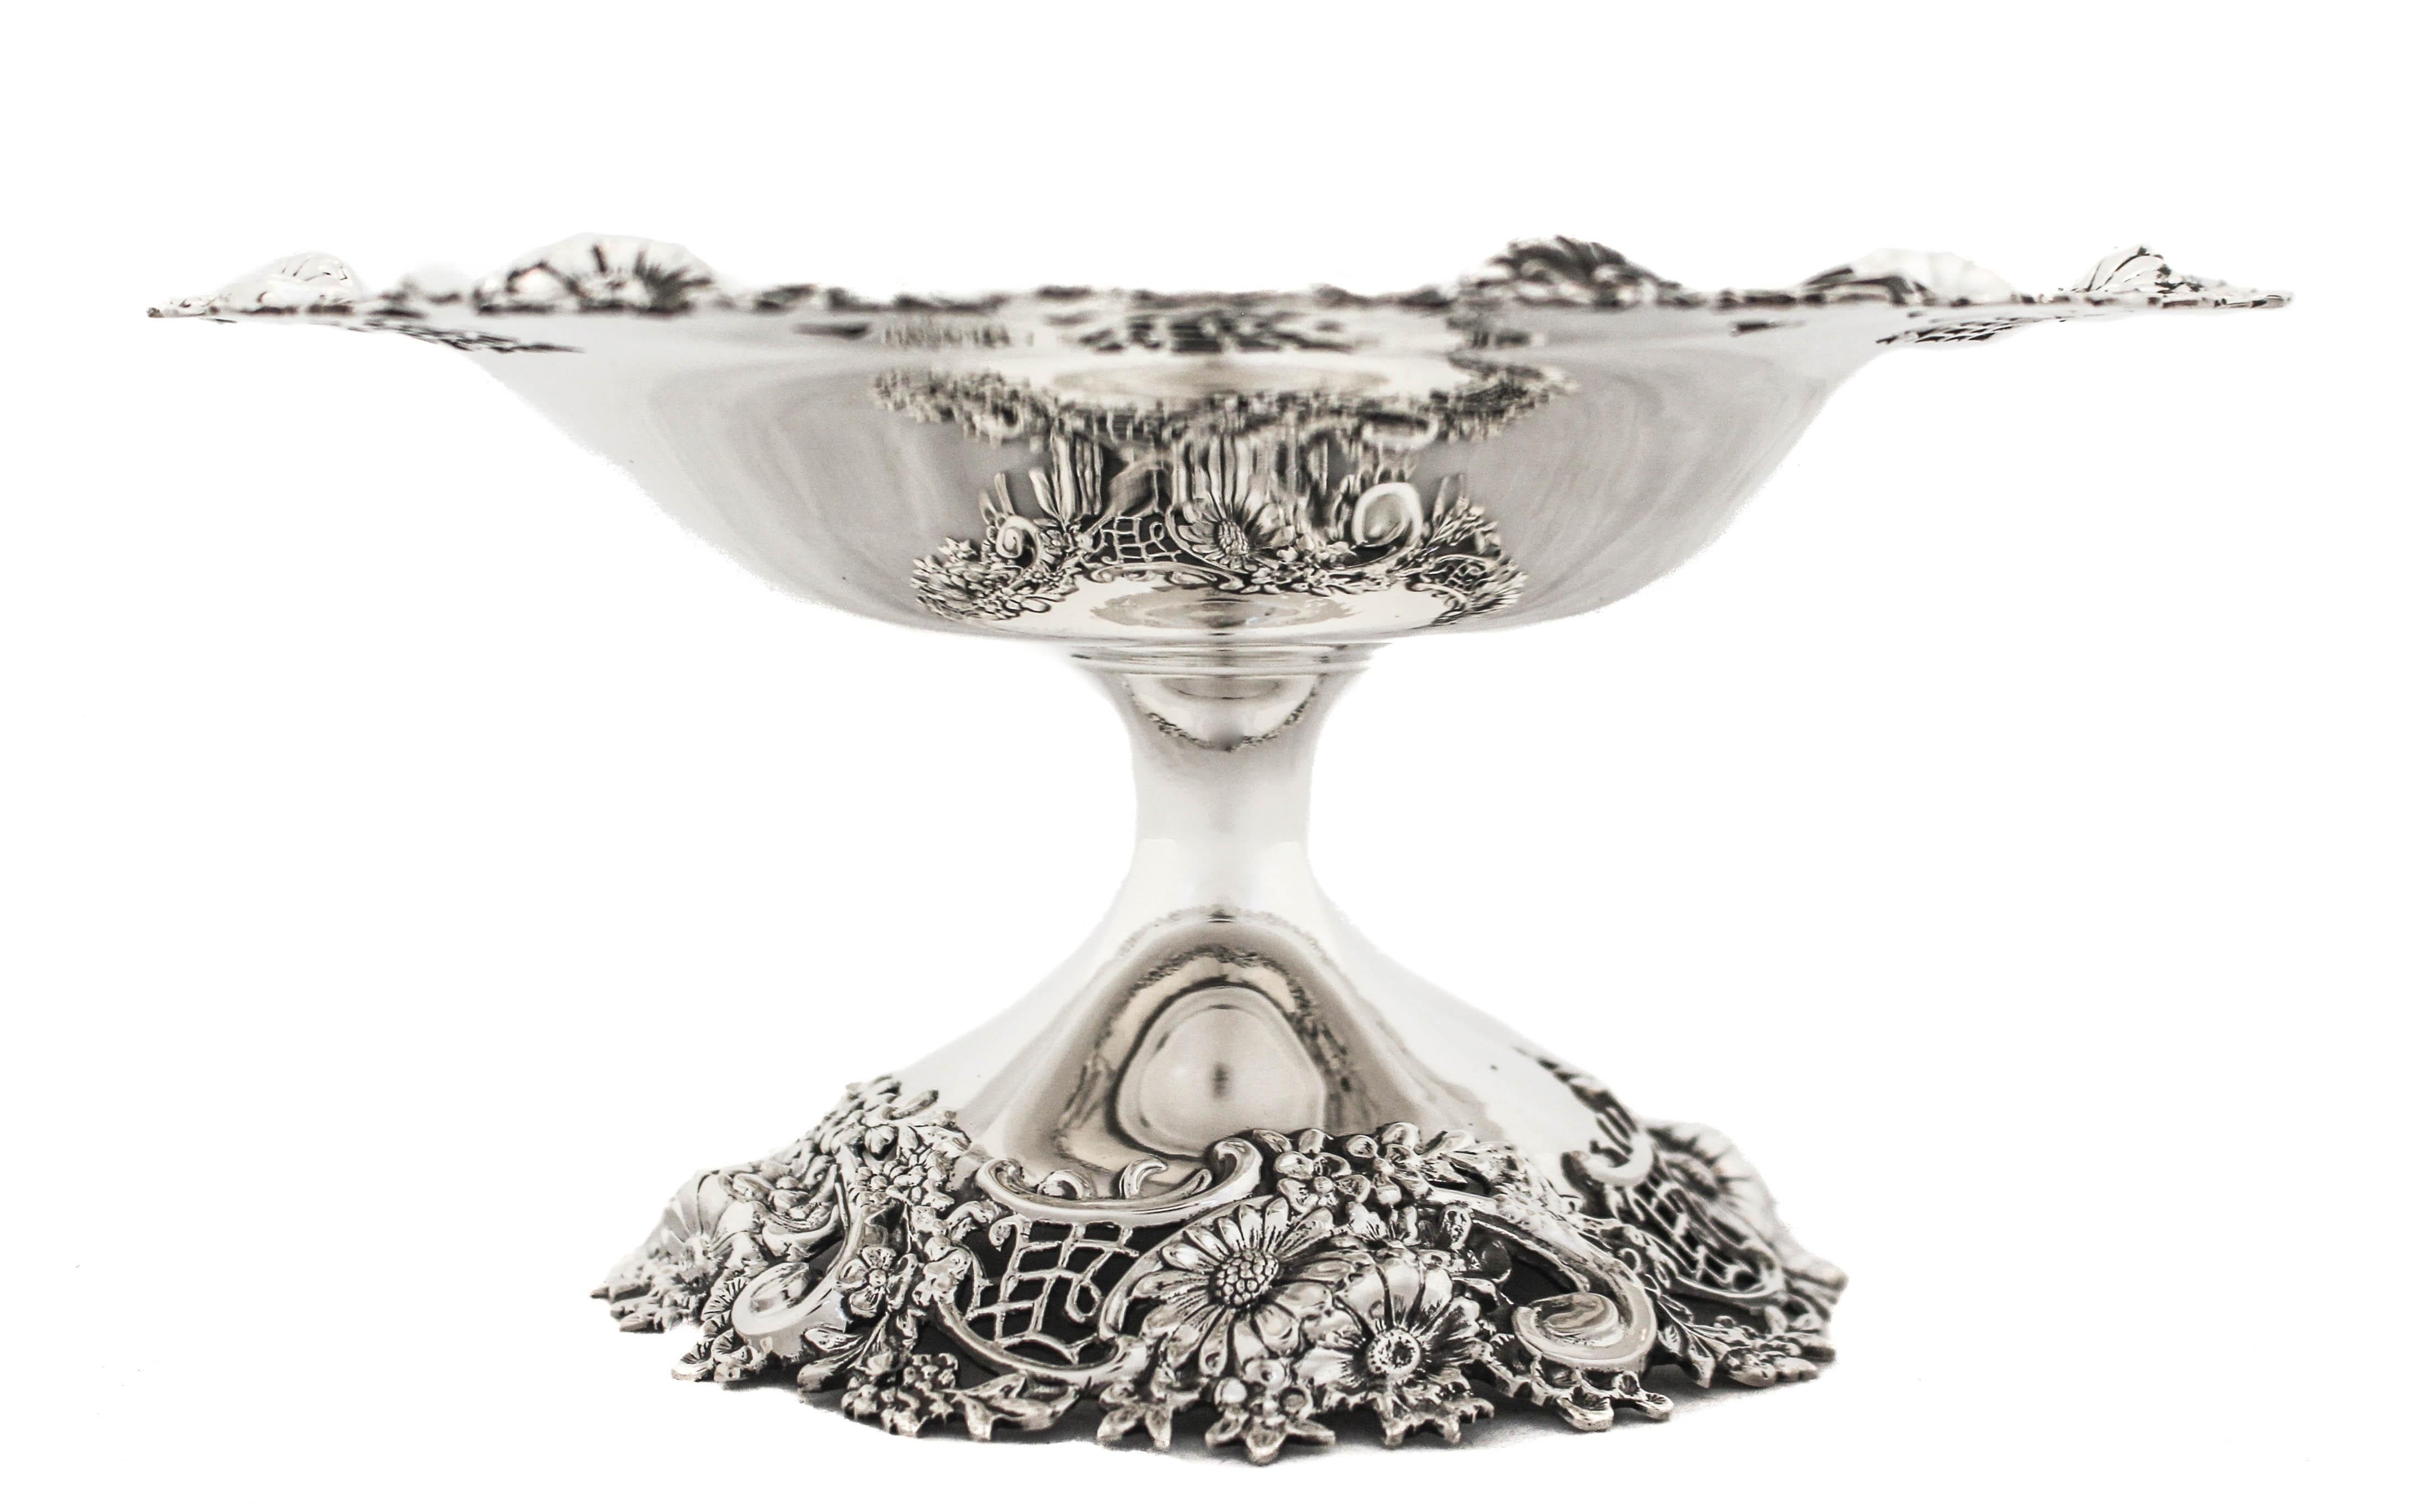 Being offered is a sterling silver compote by Redlich & Company.  It has an ornate edge and matching base.  An elaborate pattern of different flowers and leaves interspersed with cutout work.  The base is not weighted. 
Very rich and elegant.